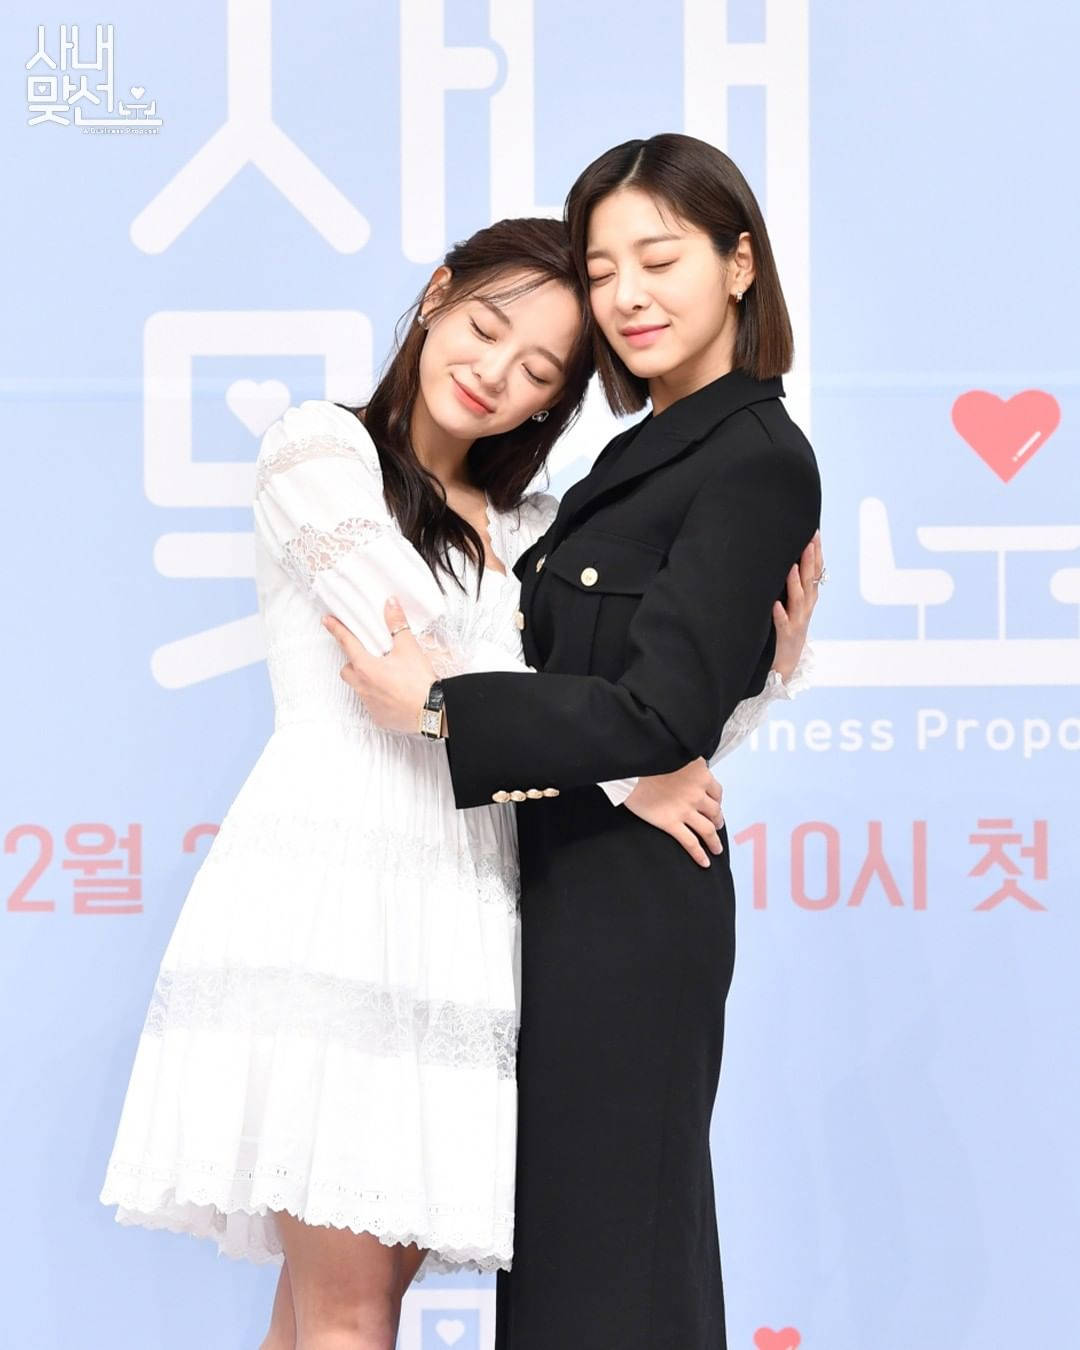 Young-Seo And Ha-Ri Business Proposal Bestfriends Wallpaper